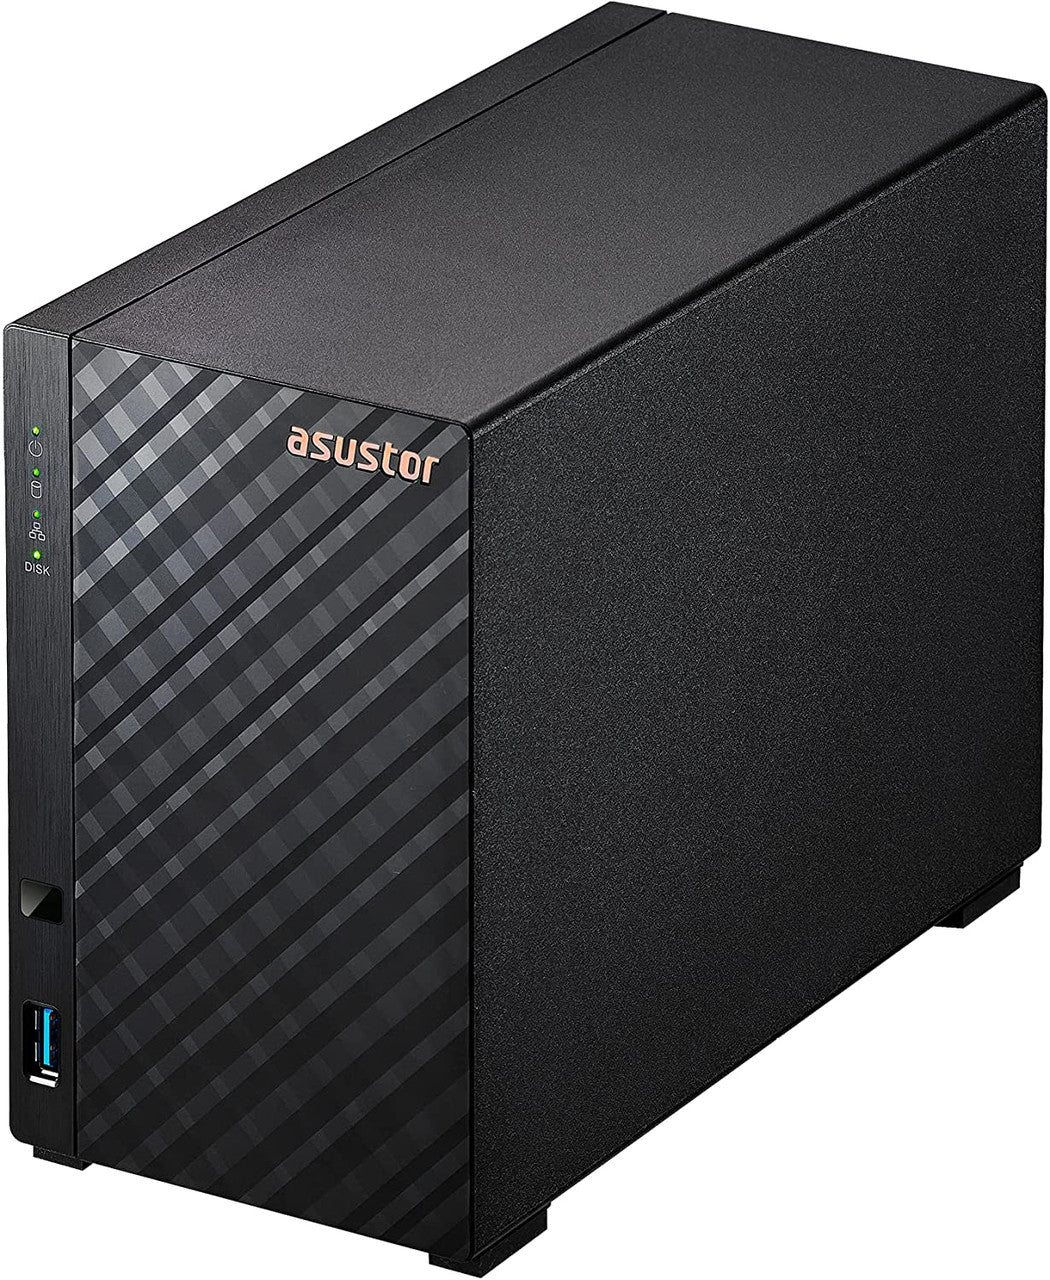 Asustor AS1102T 2-Bay Drivestor 2 NAS with 1GB RAM and 12TB (2x6TB) Western Digital RED Plus Drives